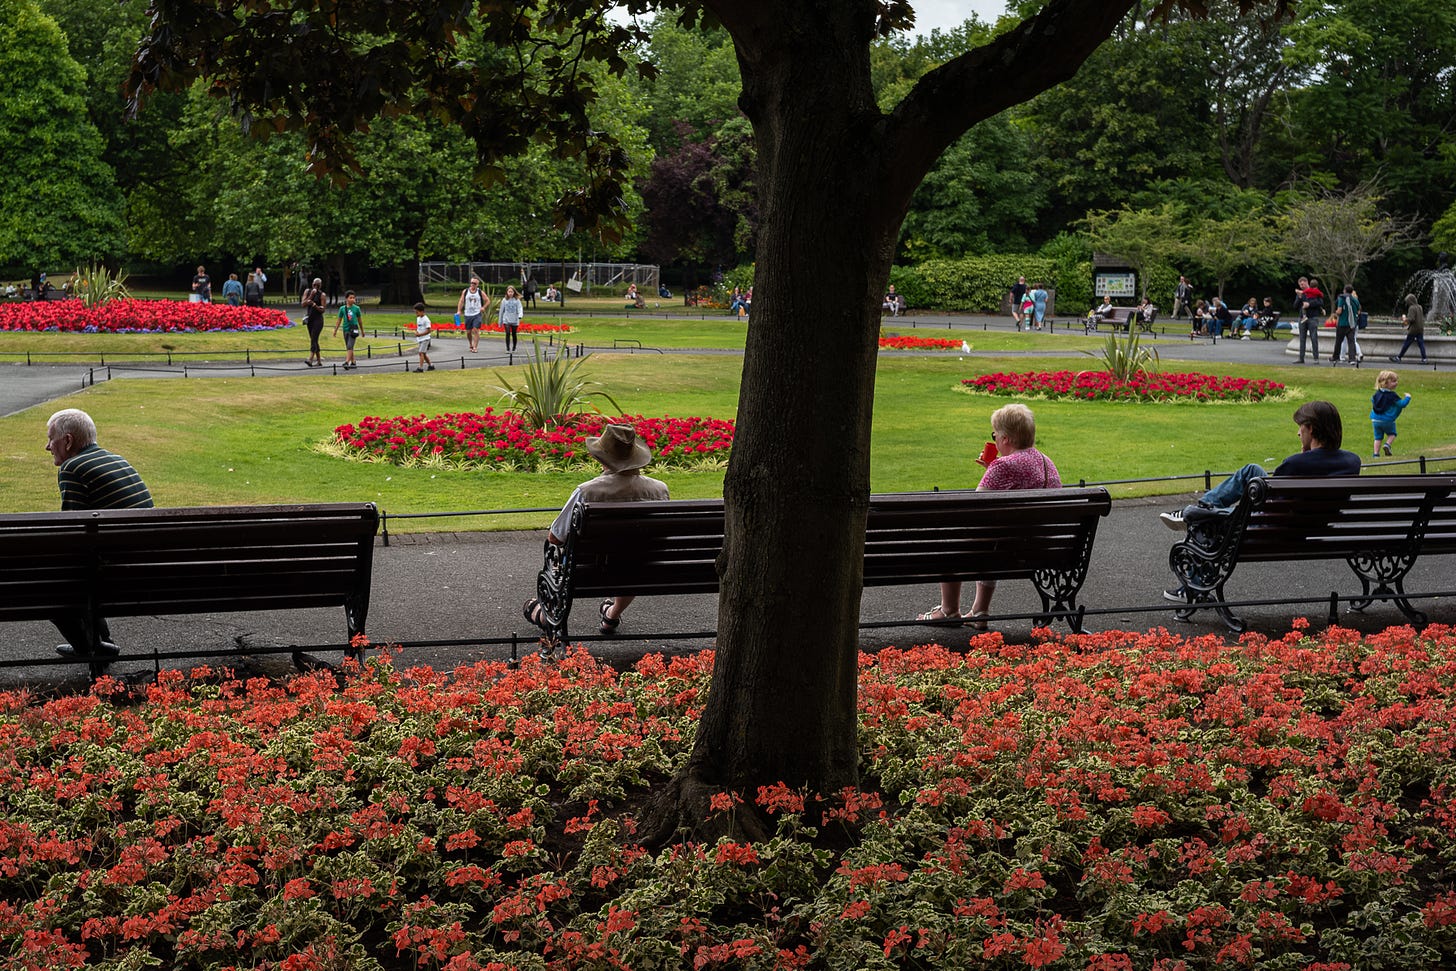 Colour photograph of people sitting on park benches facing away from the viewer. A tree trunk splits the photograph in two. At it's base are red flowers, with more red flowers in circular flower beds beyond the people.